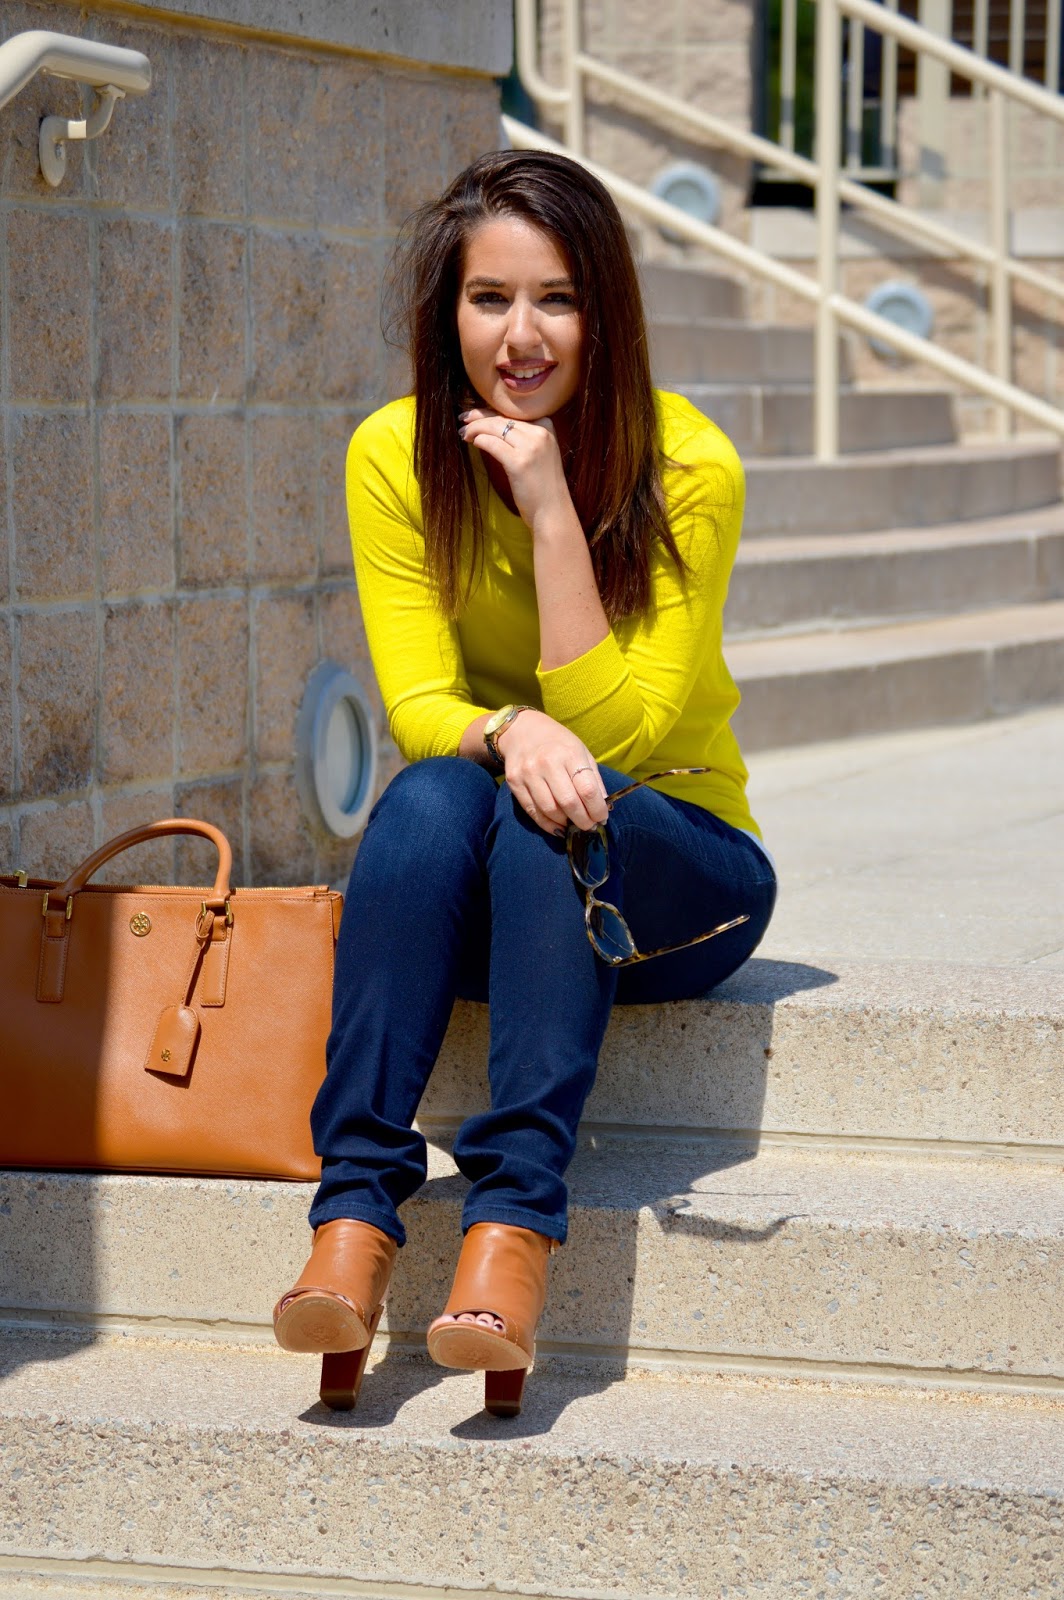 Rosy Outlook: Citron Sweater